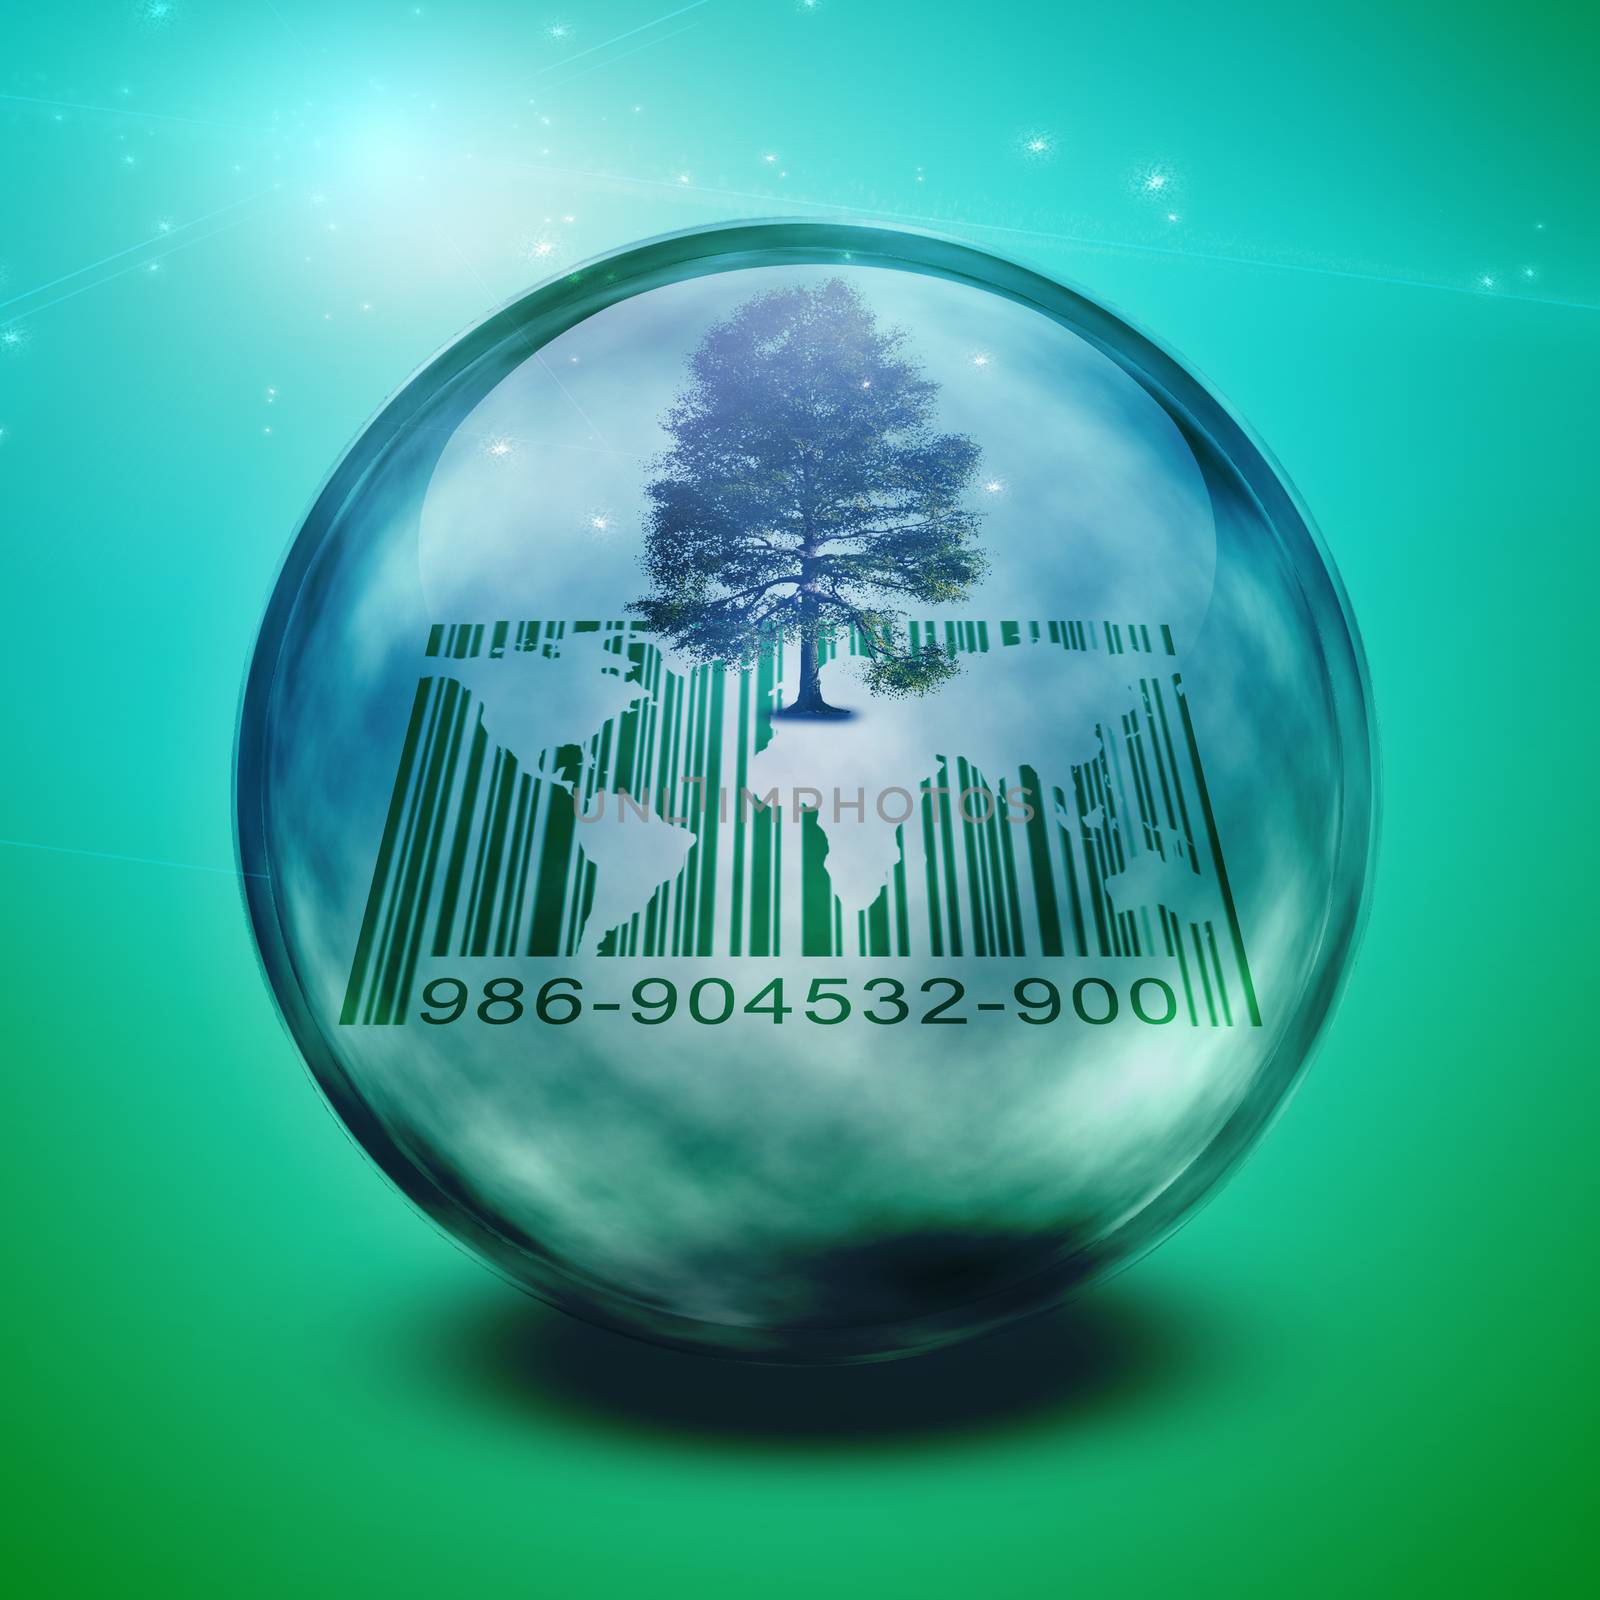 Green tree and barcode inside bubble.